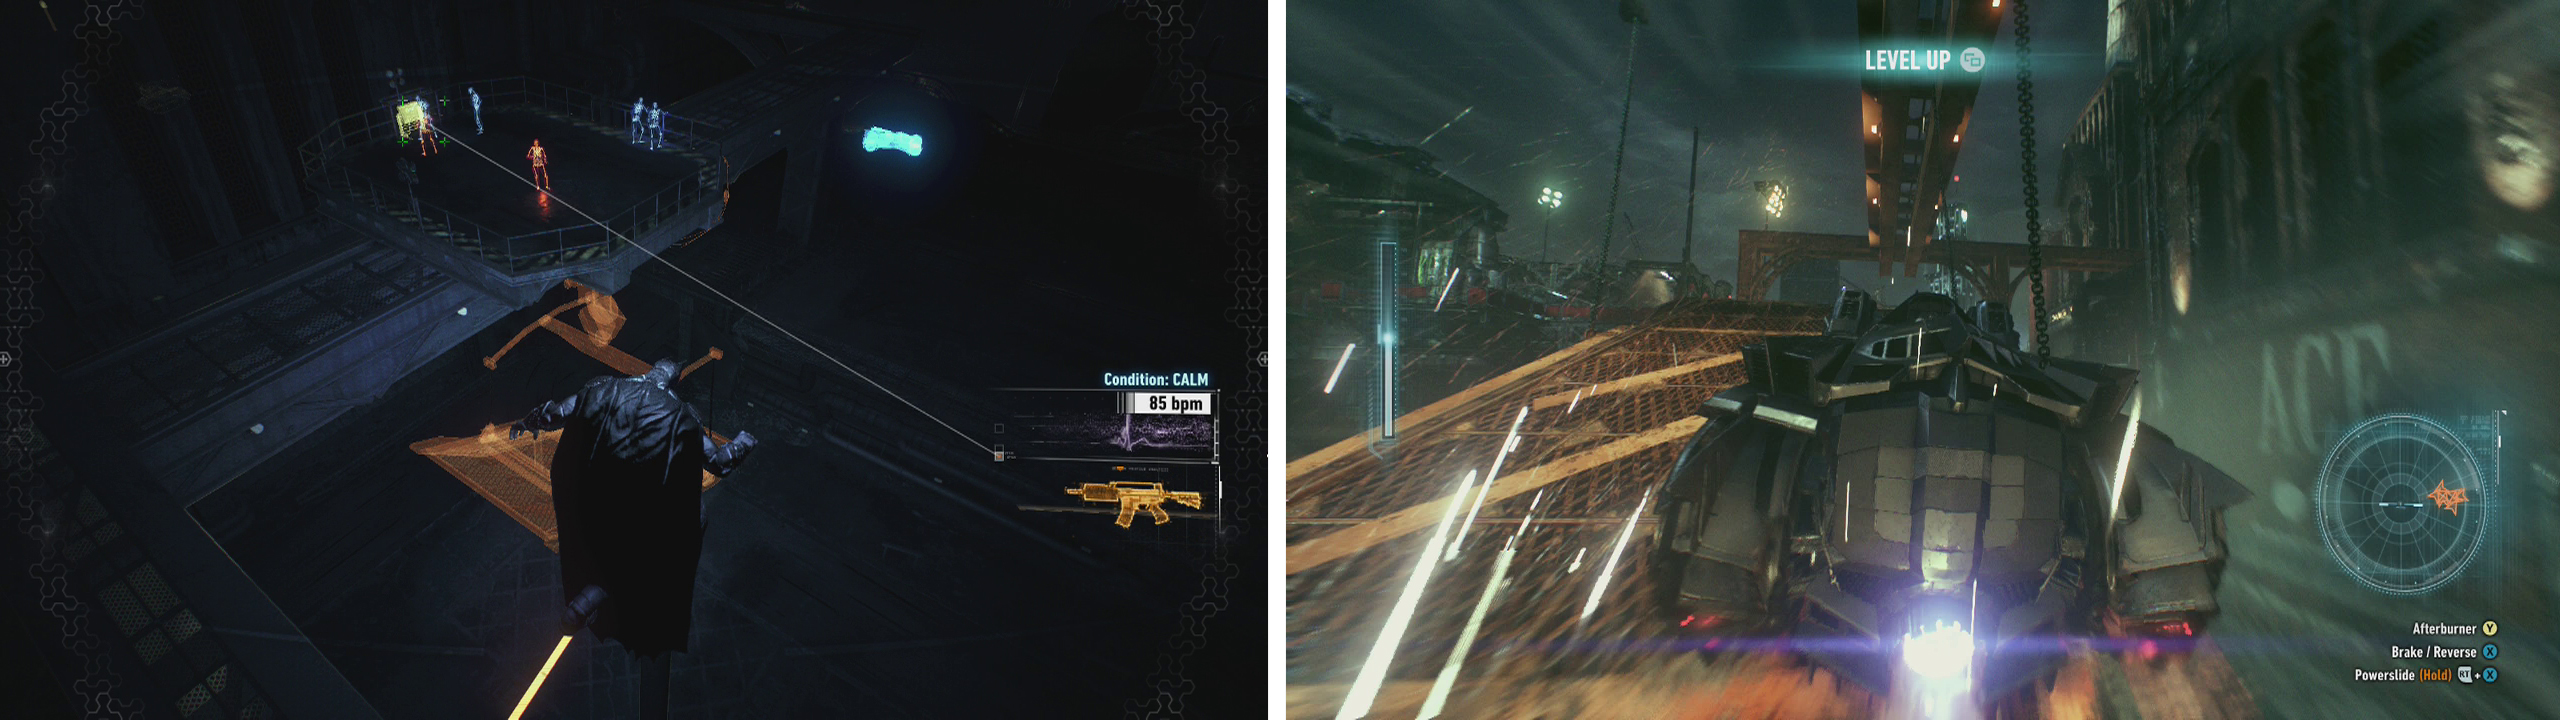 Clear the enemies from the platform (left) to move the ramp. Use the ramp to jump to the next area (right).